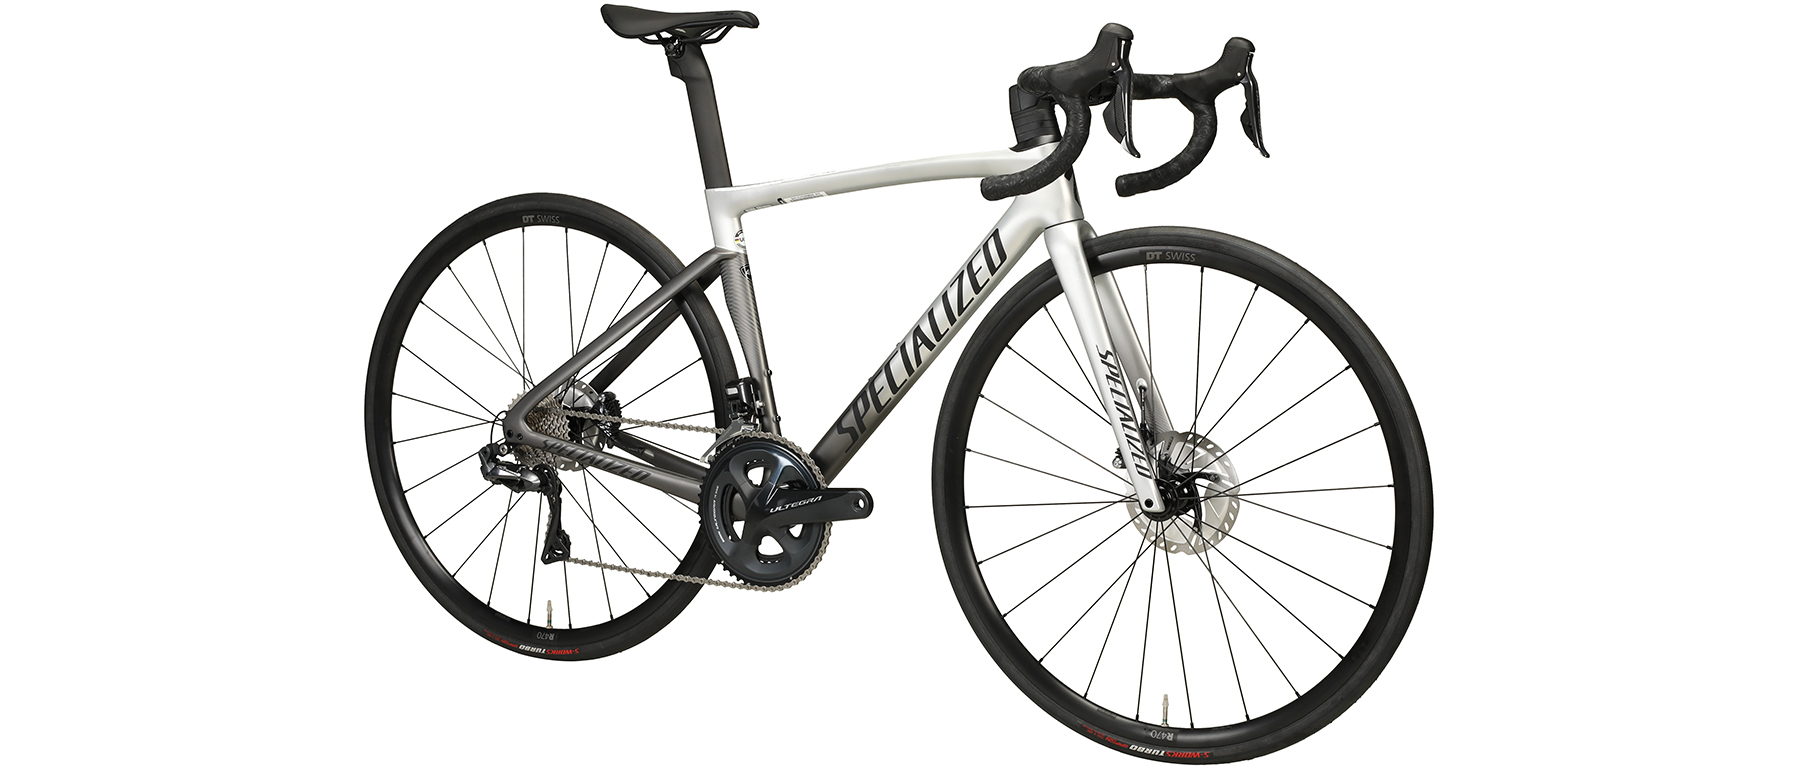 Specialized Tarmac SL7 Expert Di2 Bicycle